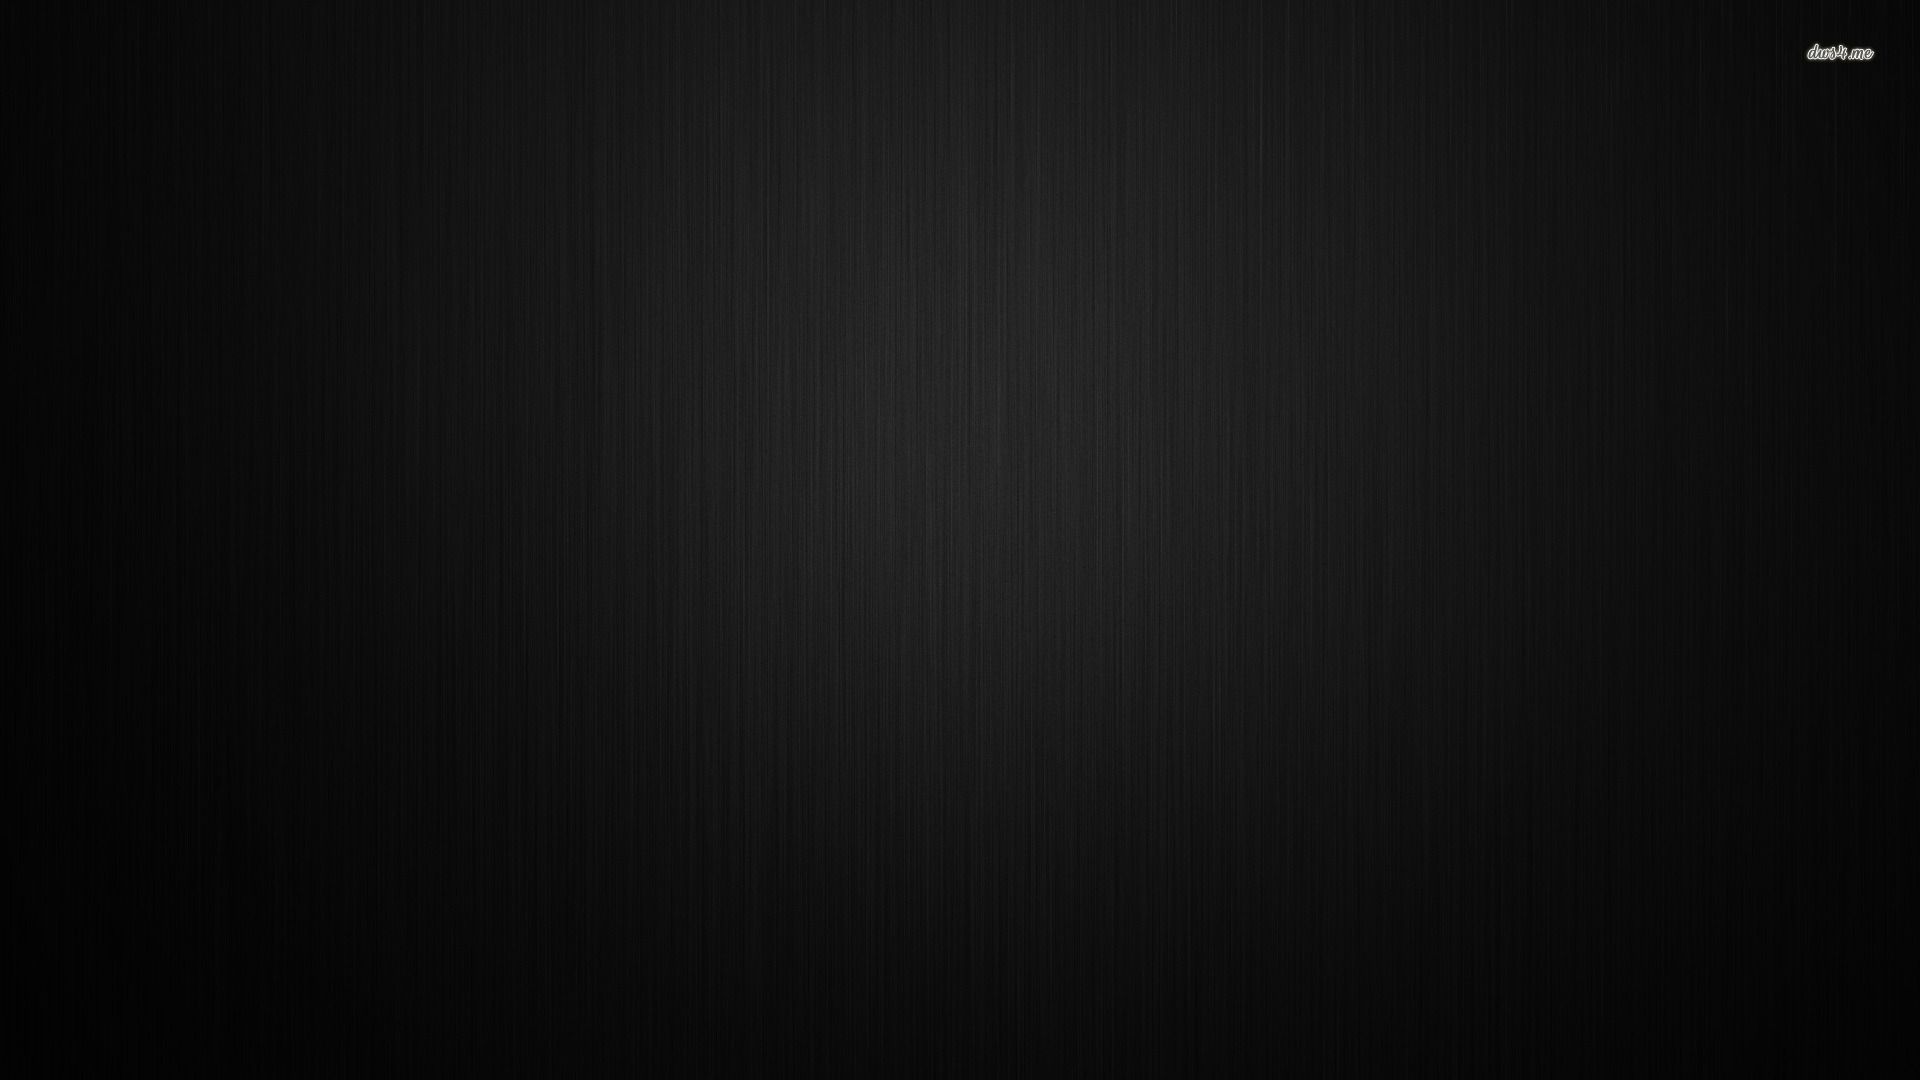 Gray Lines wallpaper - Abstract wallpapers - #3179